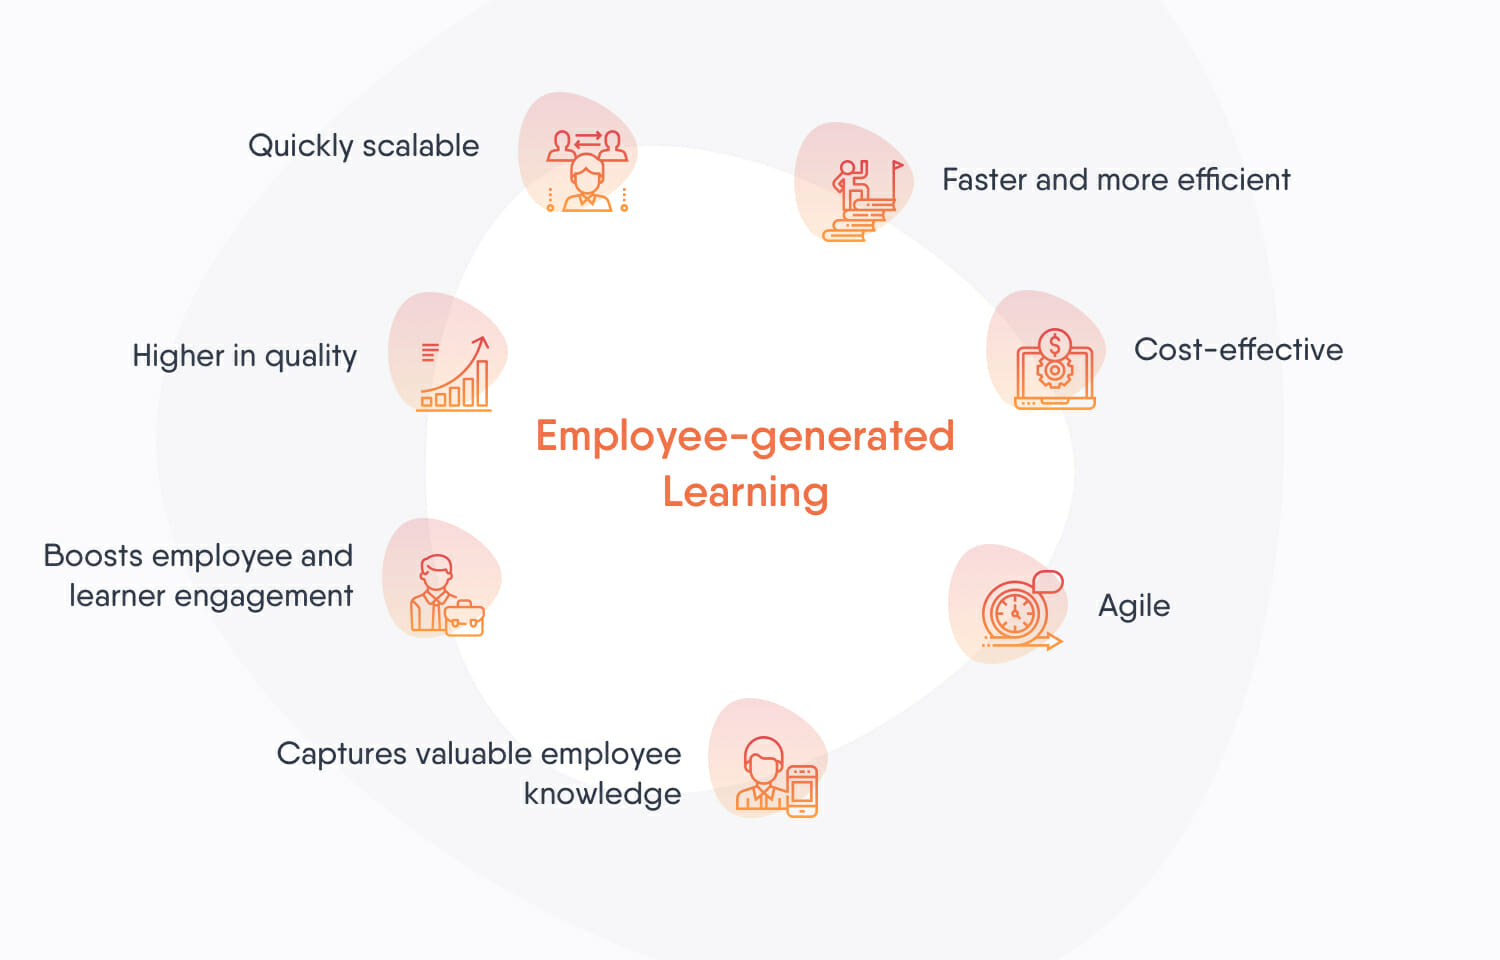 Benefits of employee-generated learning